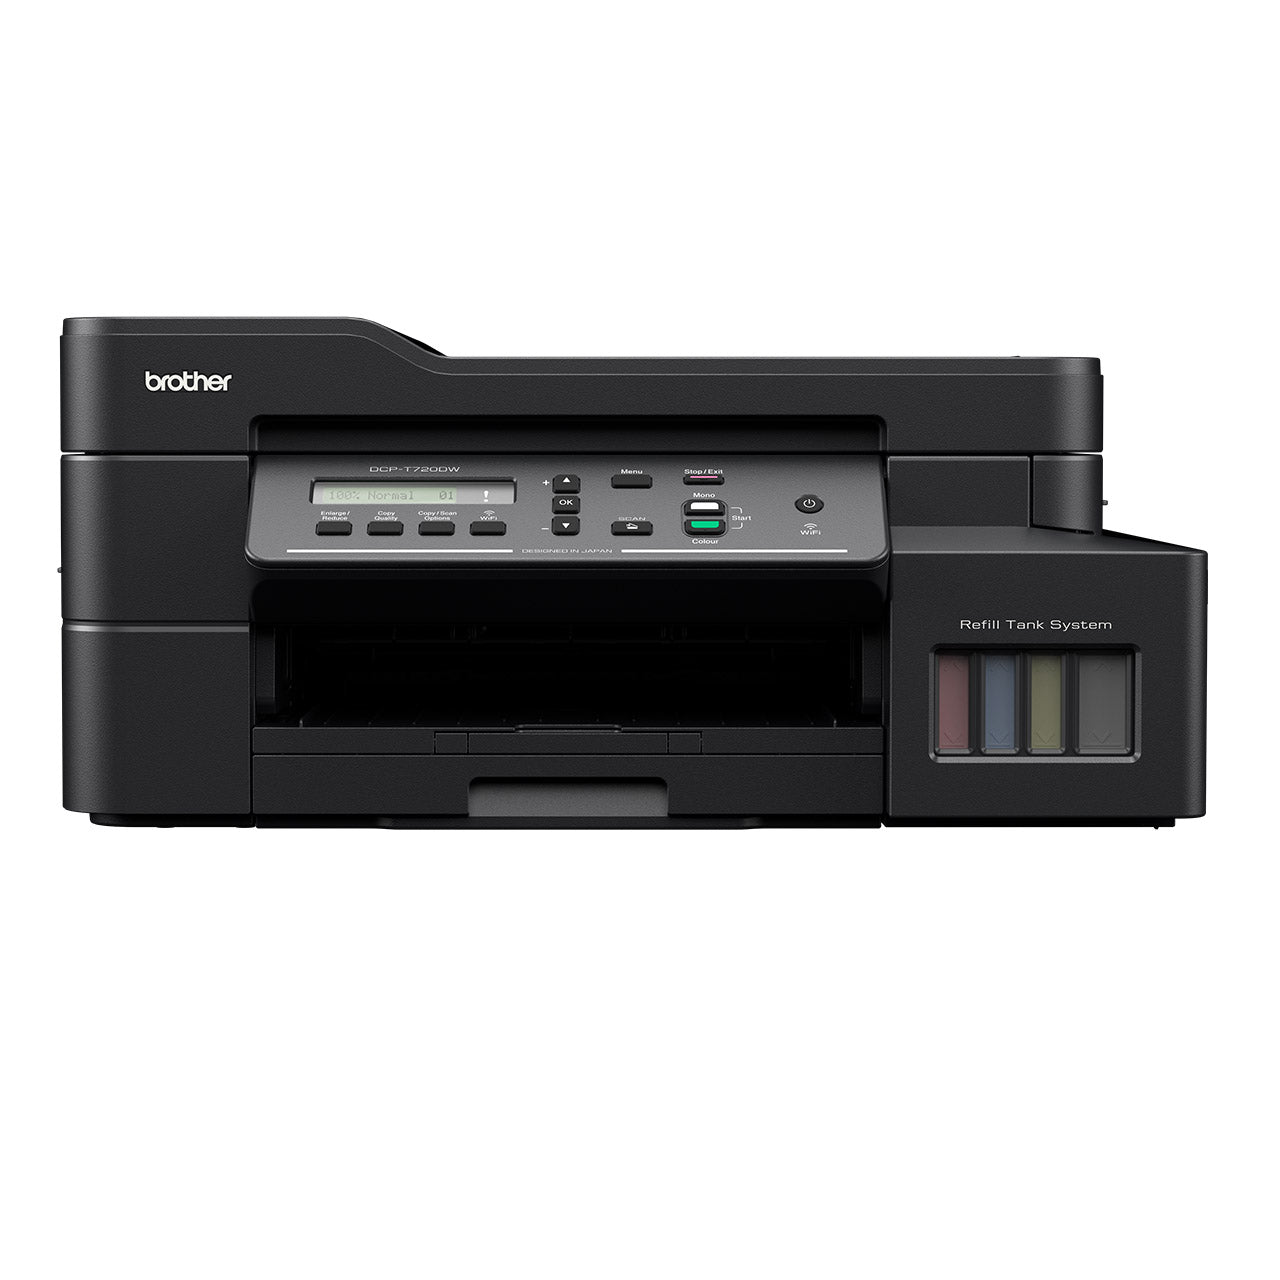 Brother DCP-T720DW Ink Tank Printer, Price in Lebanon –